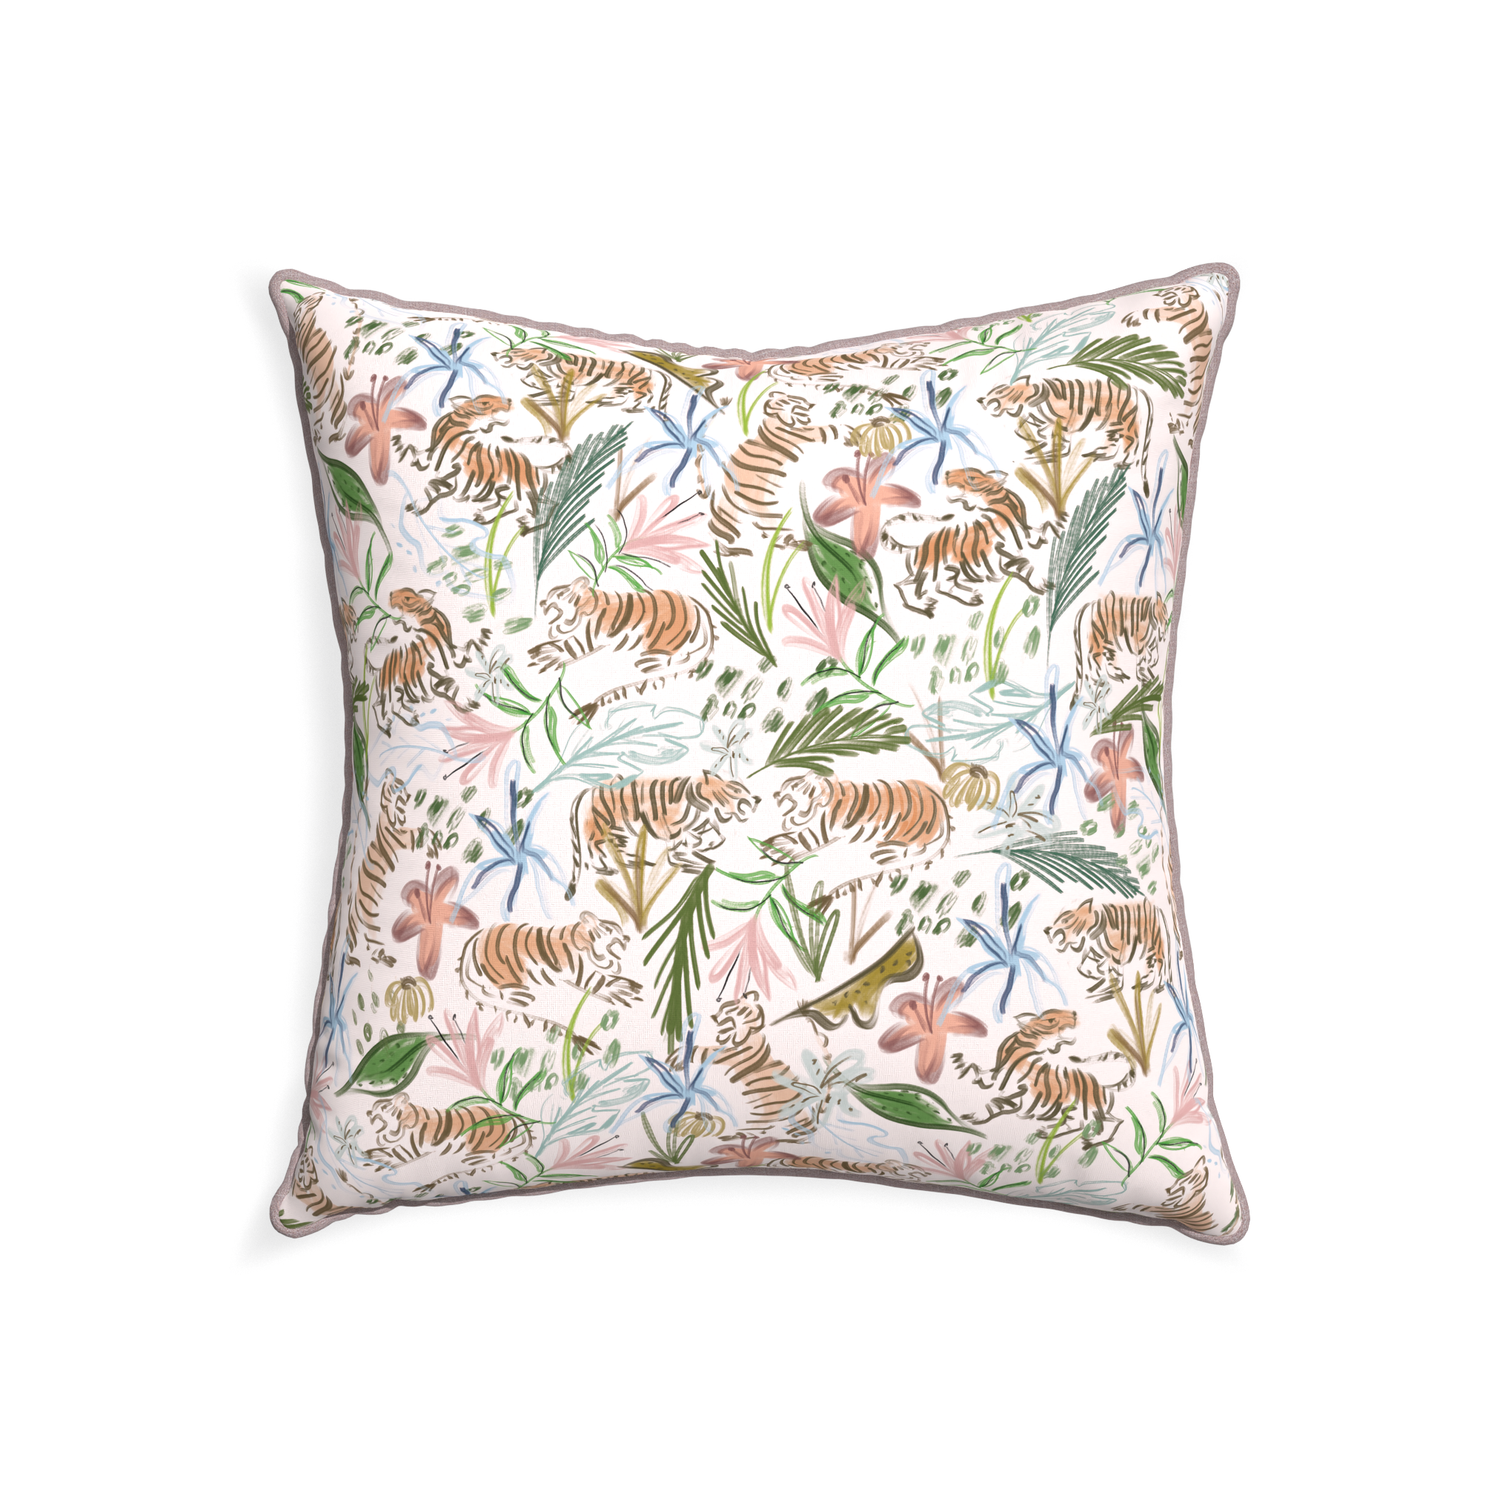 22-square frida pink custom pink chinoiserie tigerpillow with orchid piping on white background